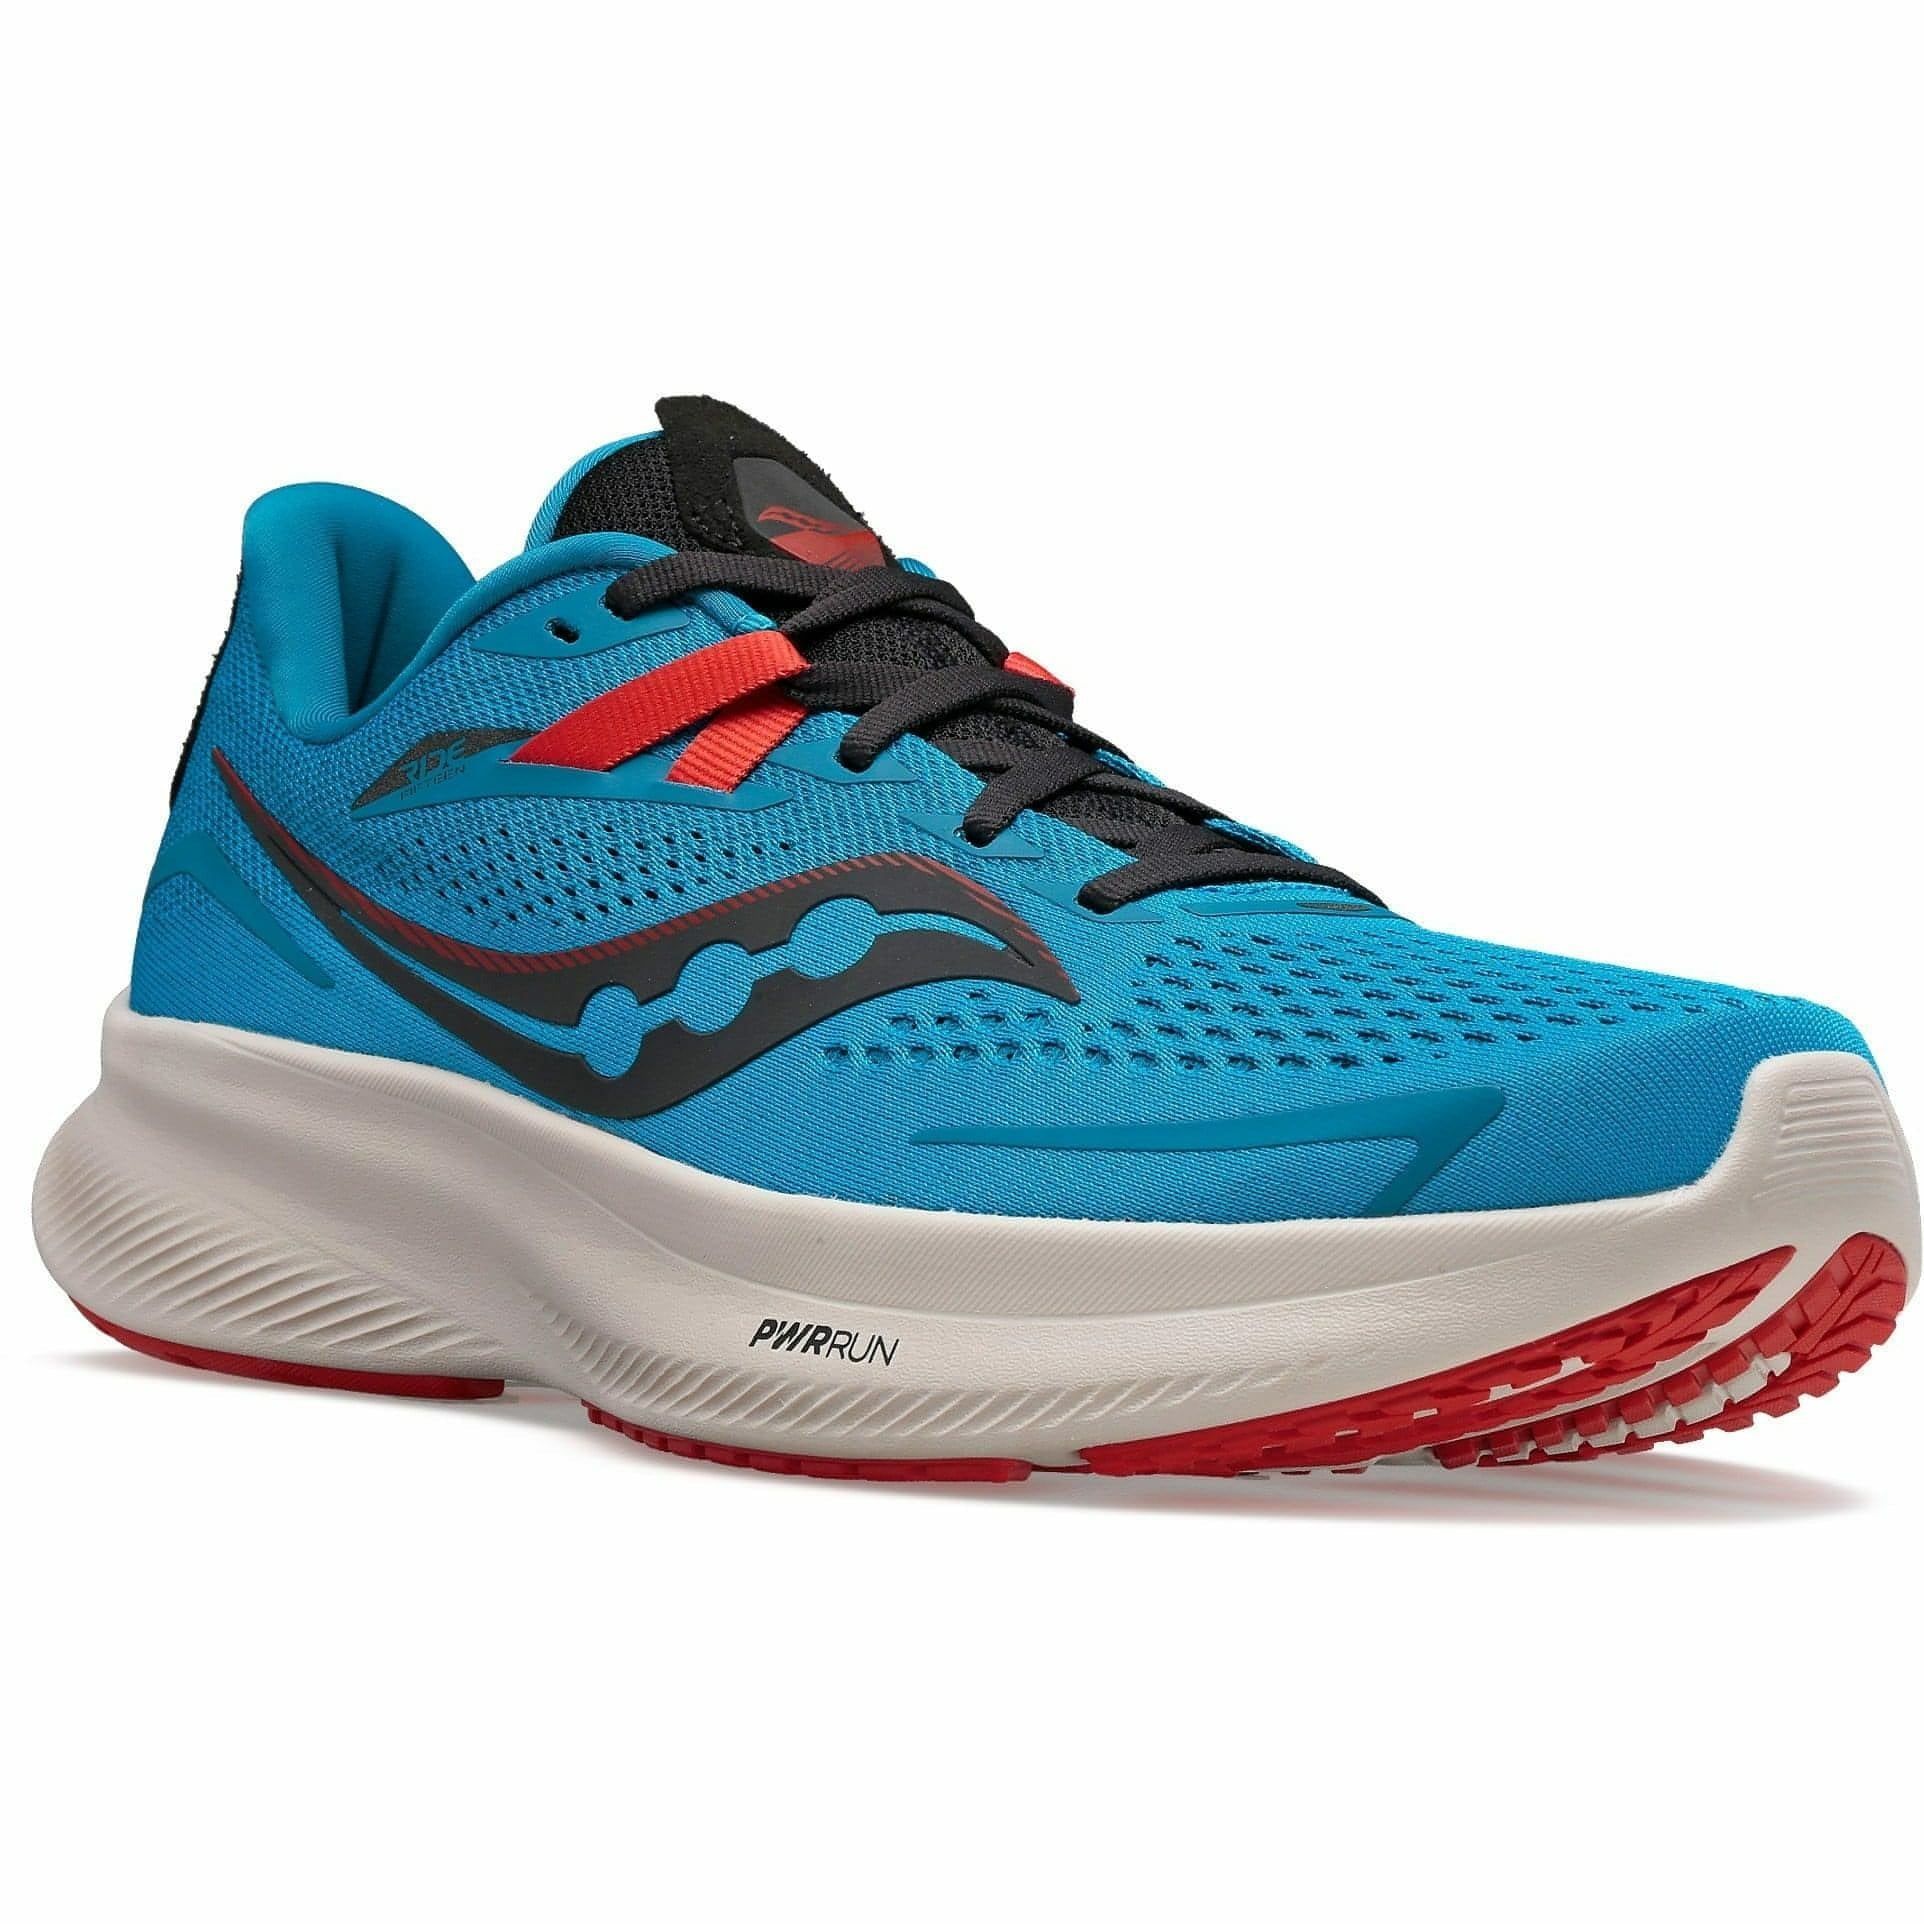 Saucony Ride 15 Mens Running Shoes - Blue - Start Fitness